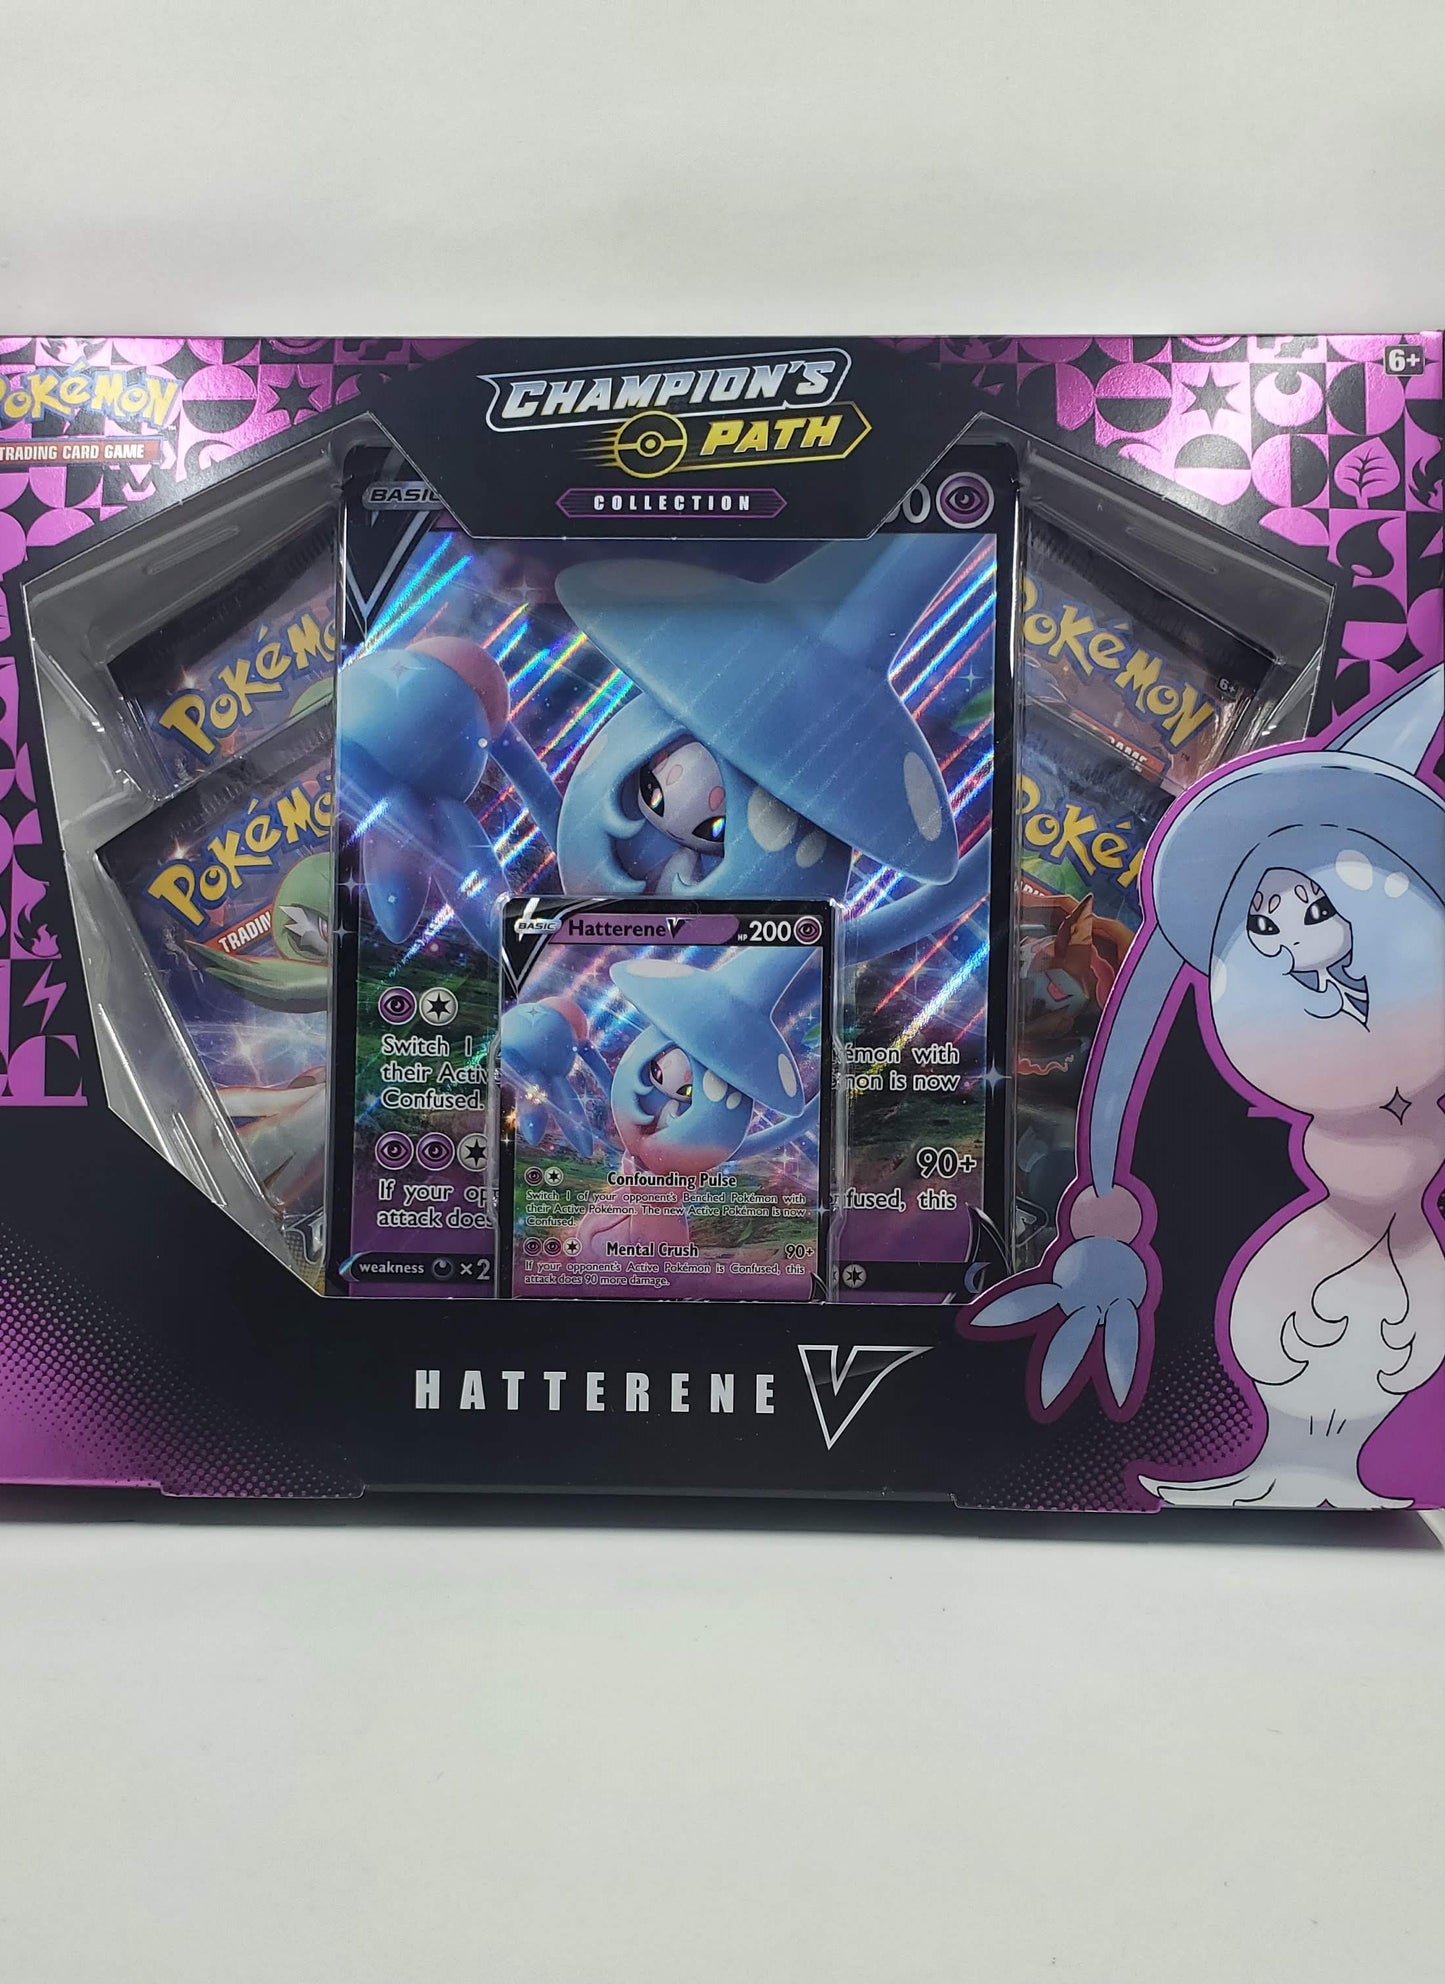 Hatterene V Champions Path Collection Box